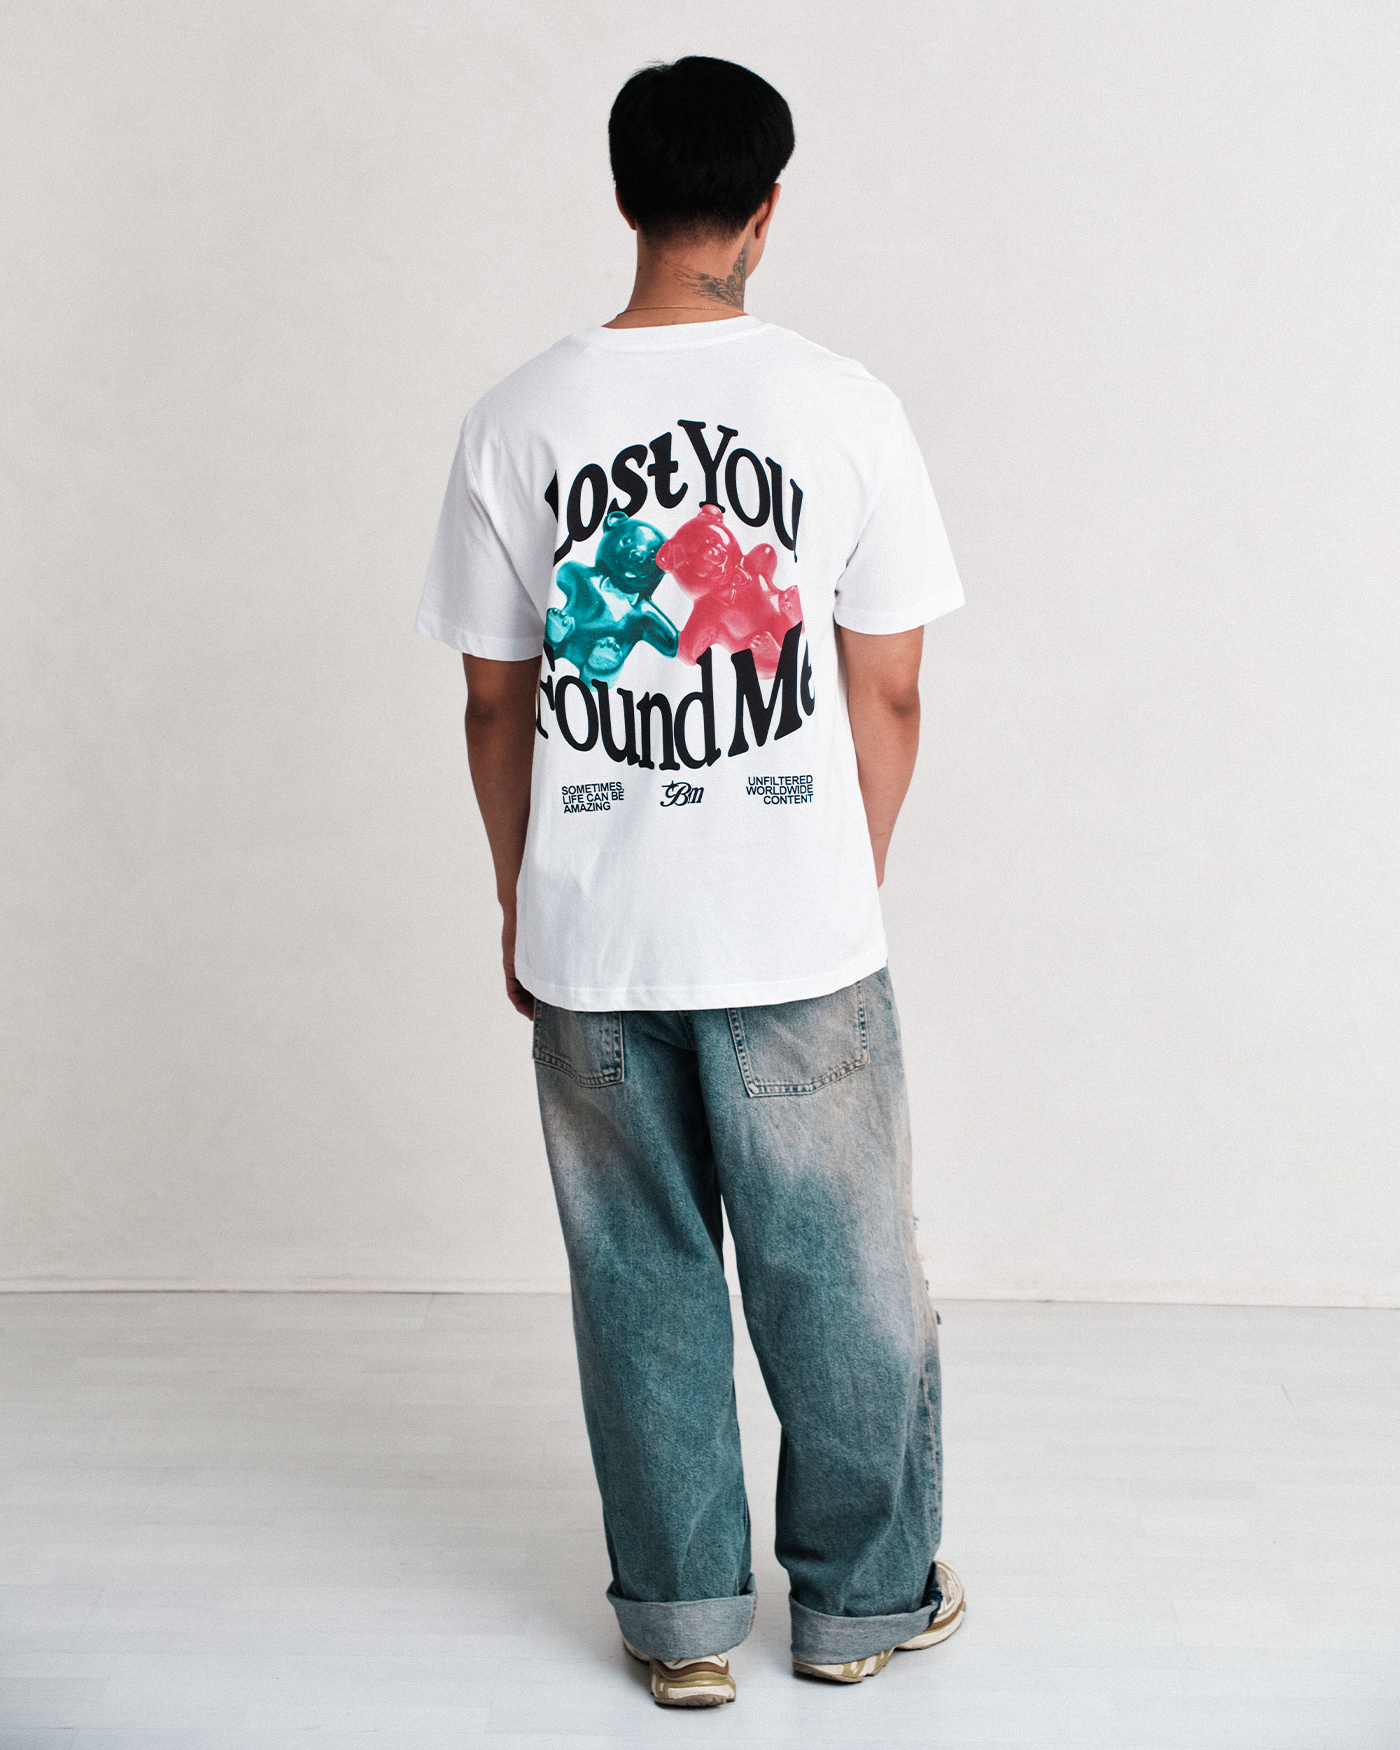 Lost You Found Me Tee